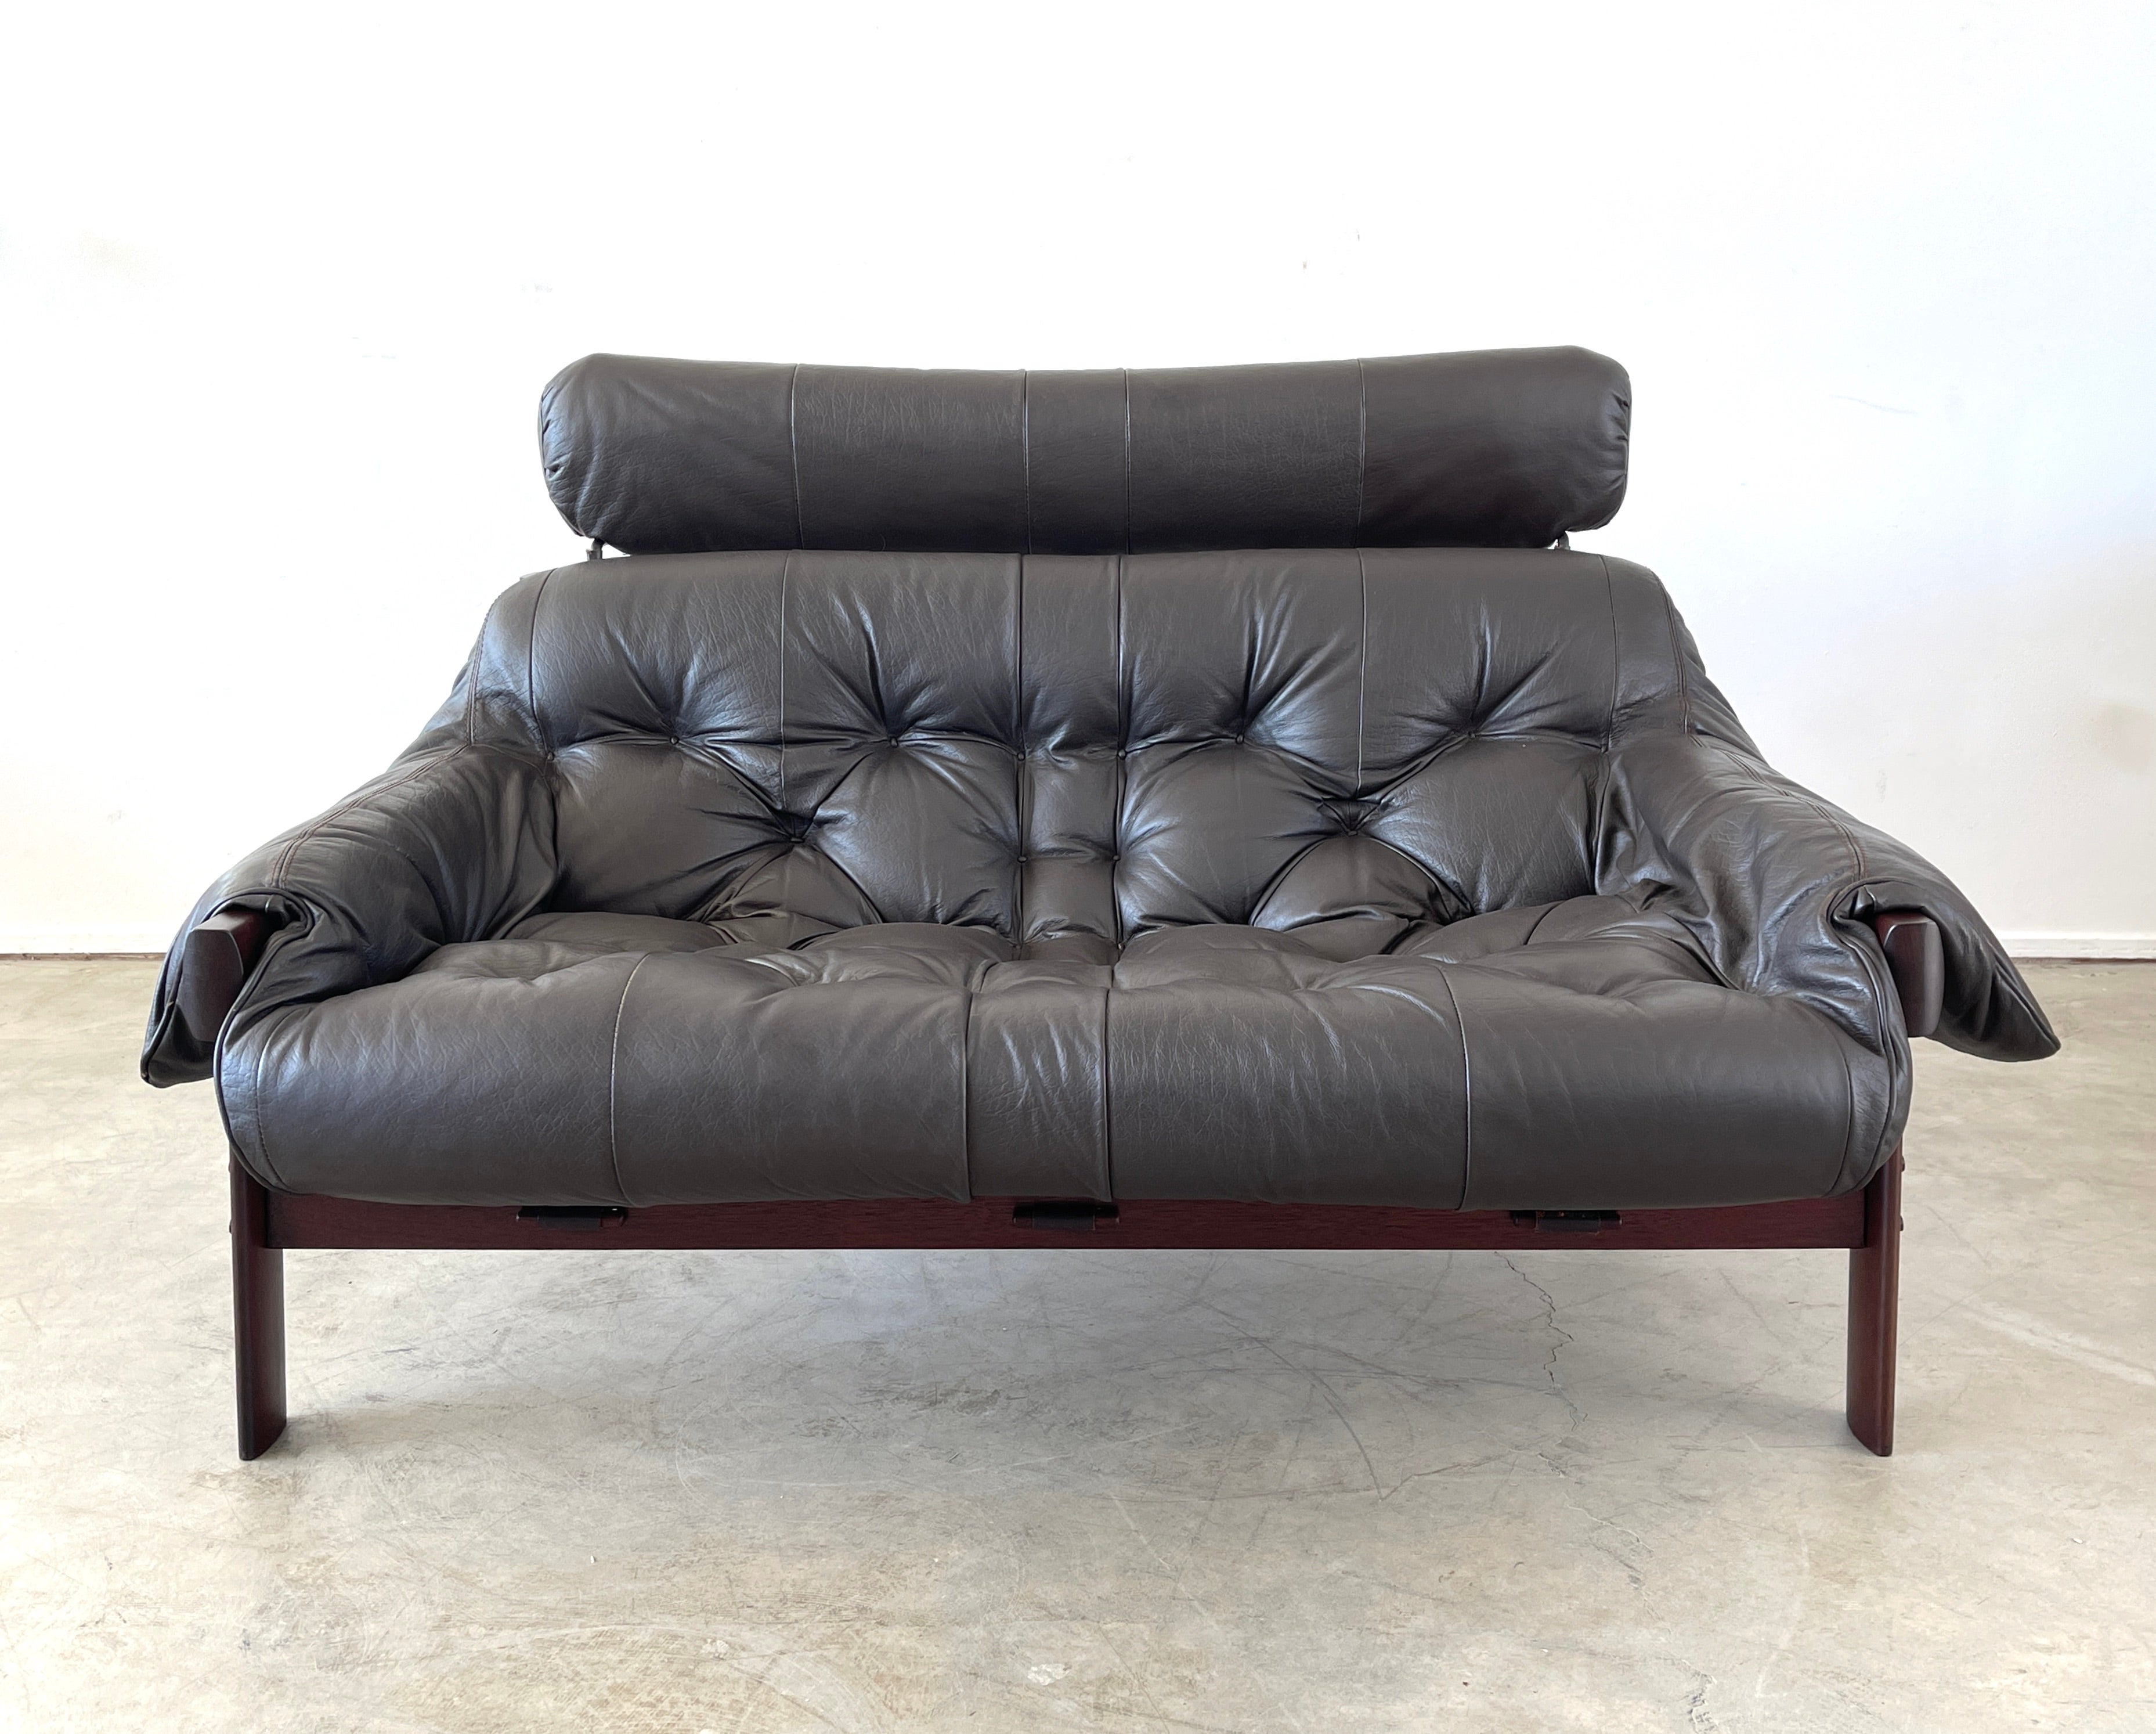 Settee by Percival Lafer with rosewood frame and black leather.
Signature sling shape with headrest and straps.
Matching sofa and chairs available. 

